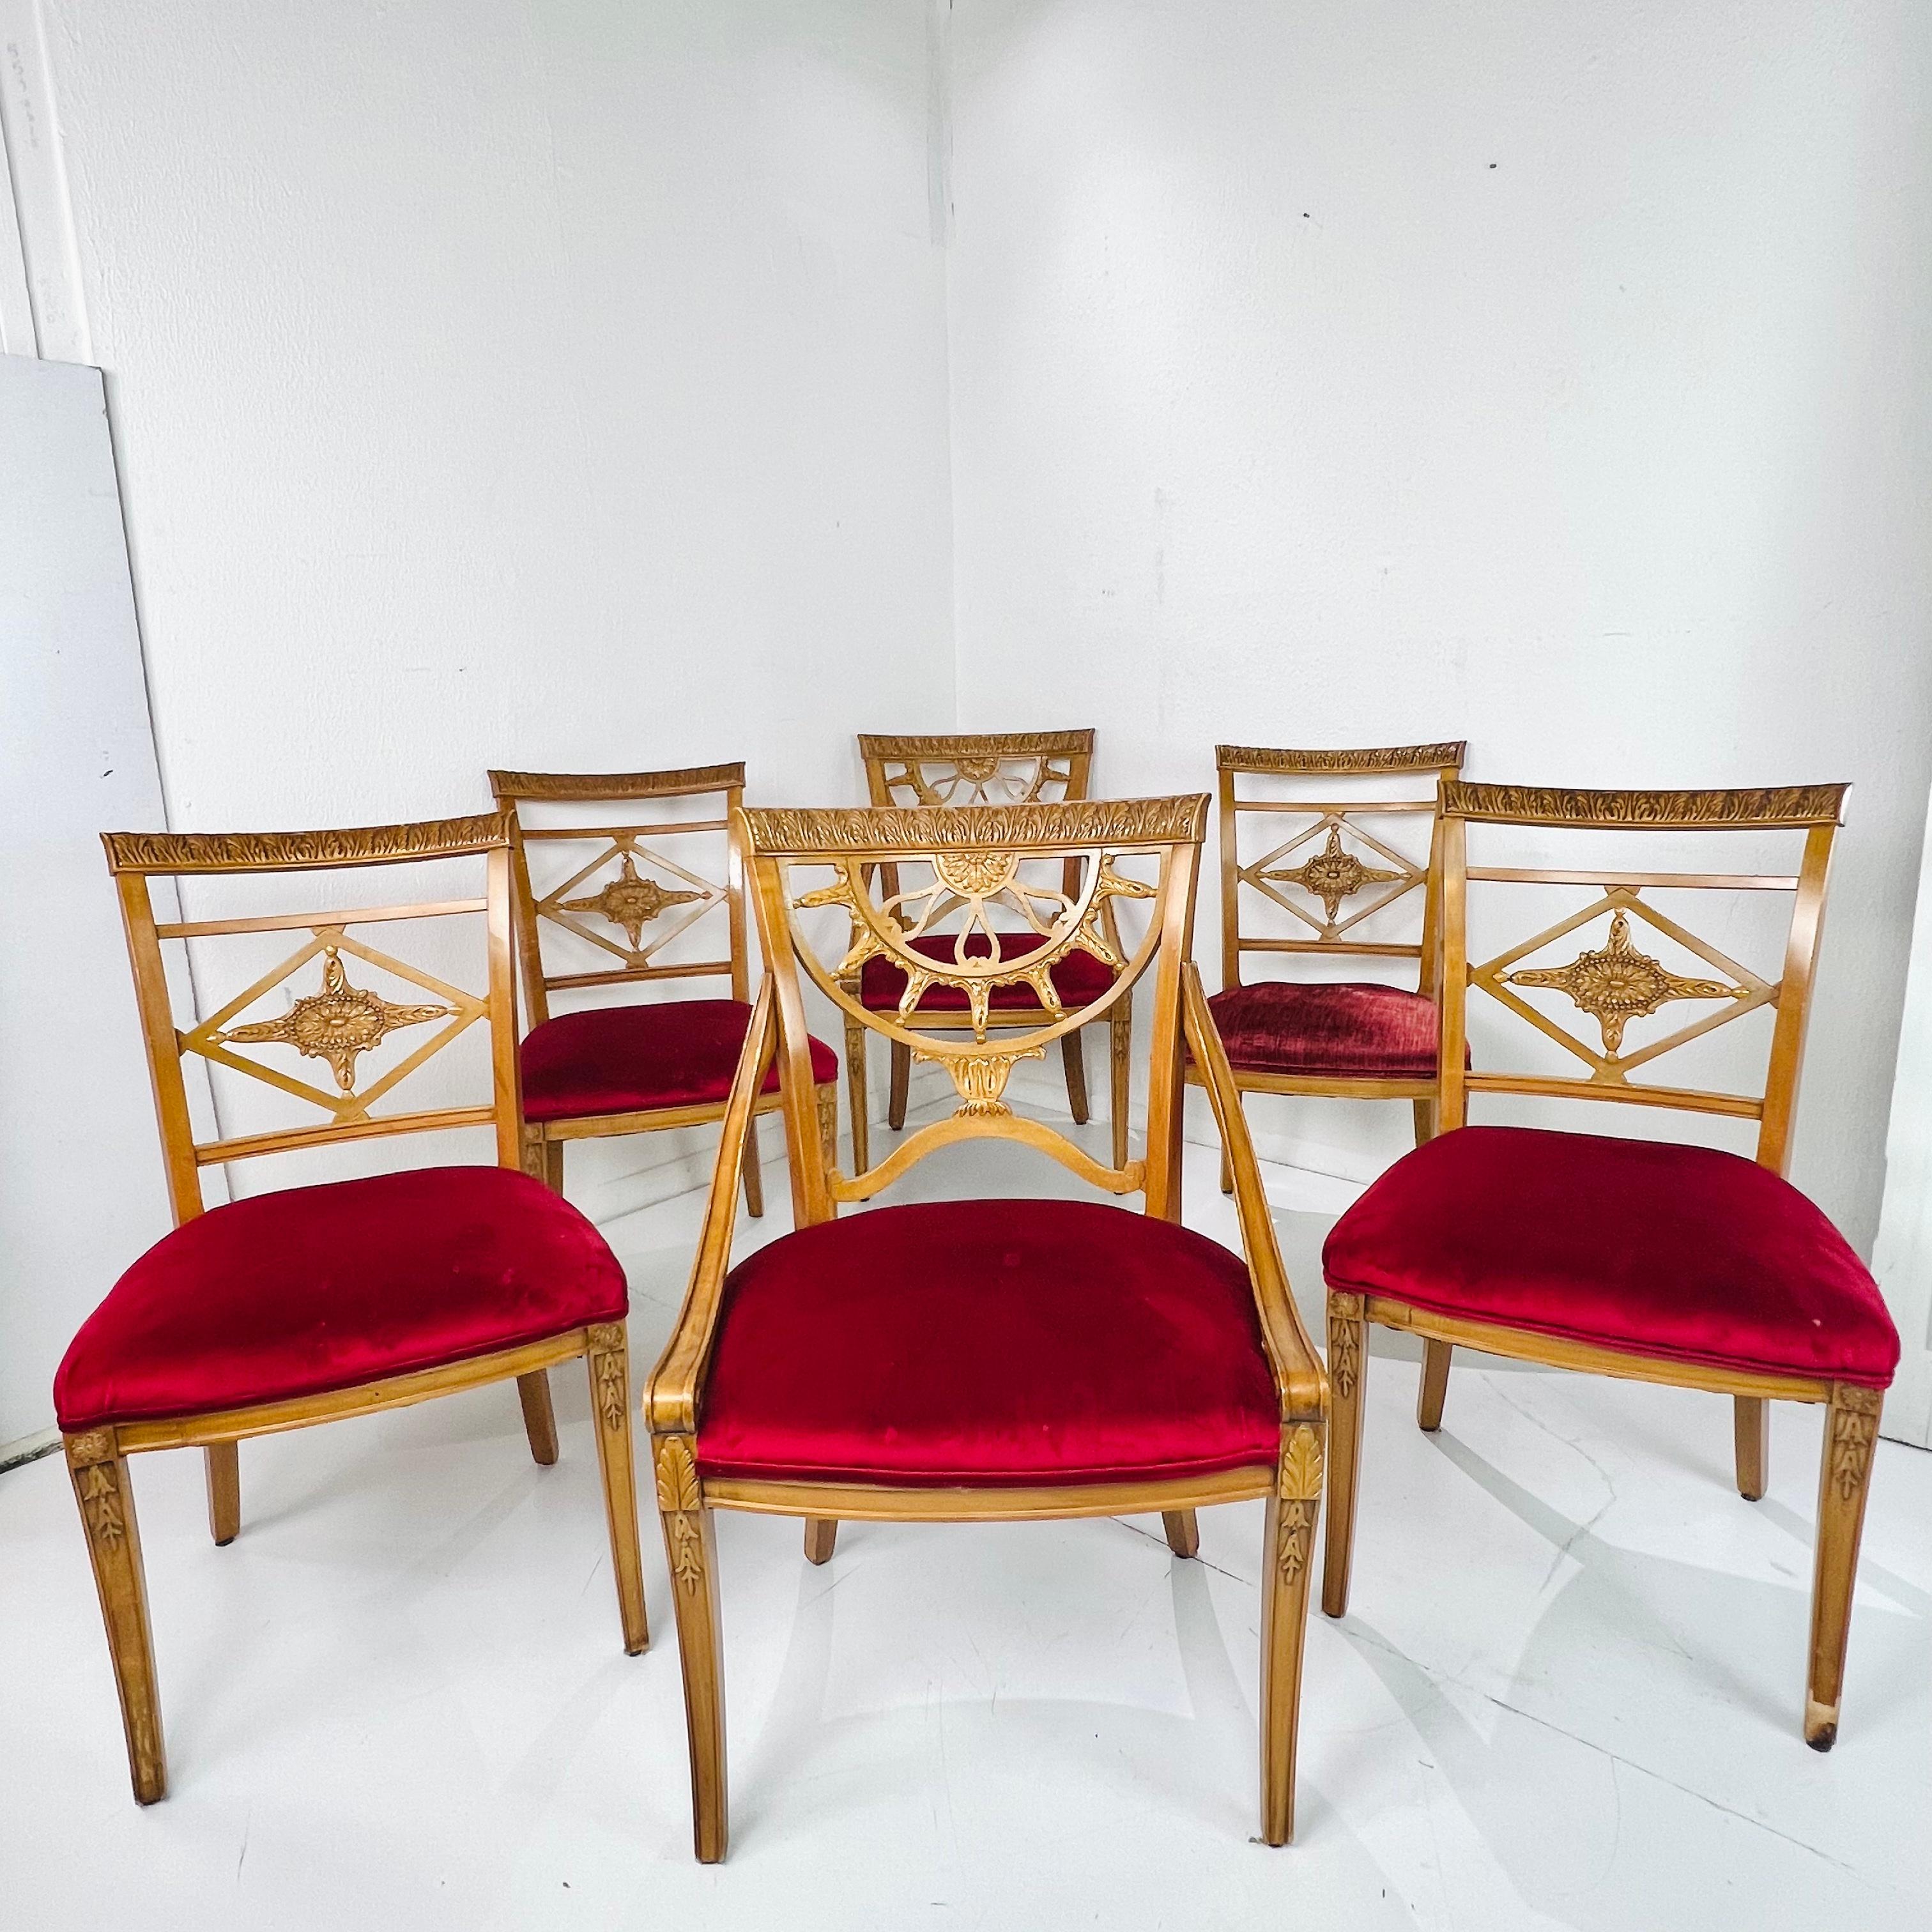 A classic set of six French neoclassical dining room chairs from the late 19th century, with carved splat, back and arms, and fluted legs. Upholstery shows fading, stains and wear - Reupholstery and touch-up recommended. One chair has crack in frame